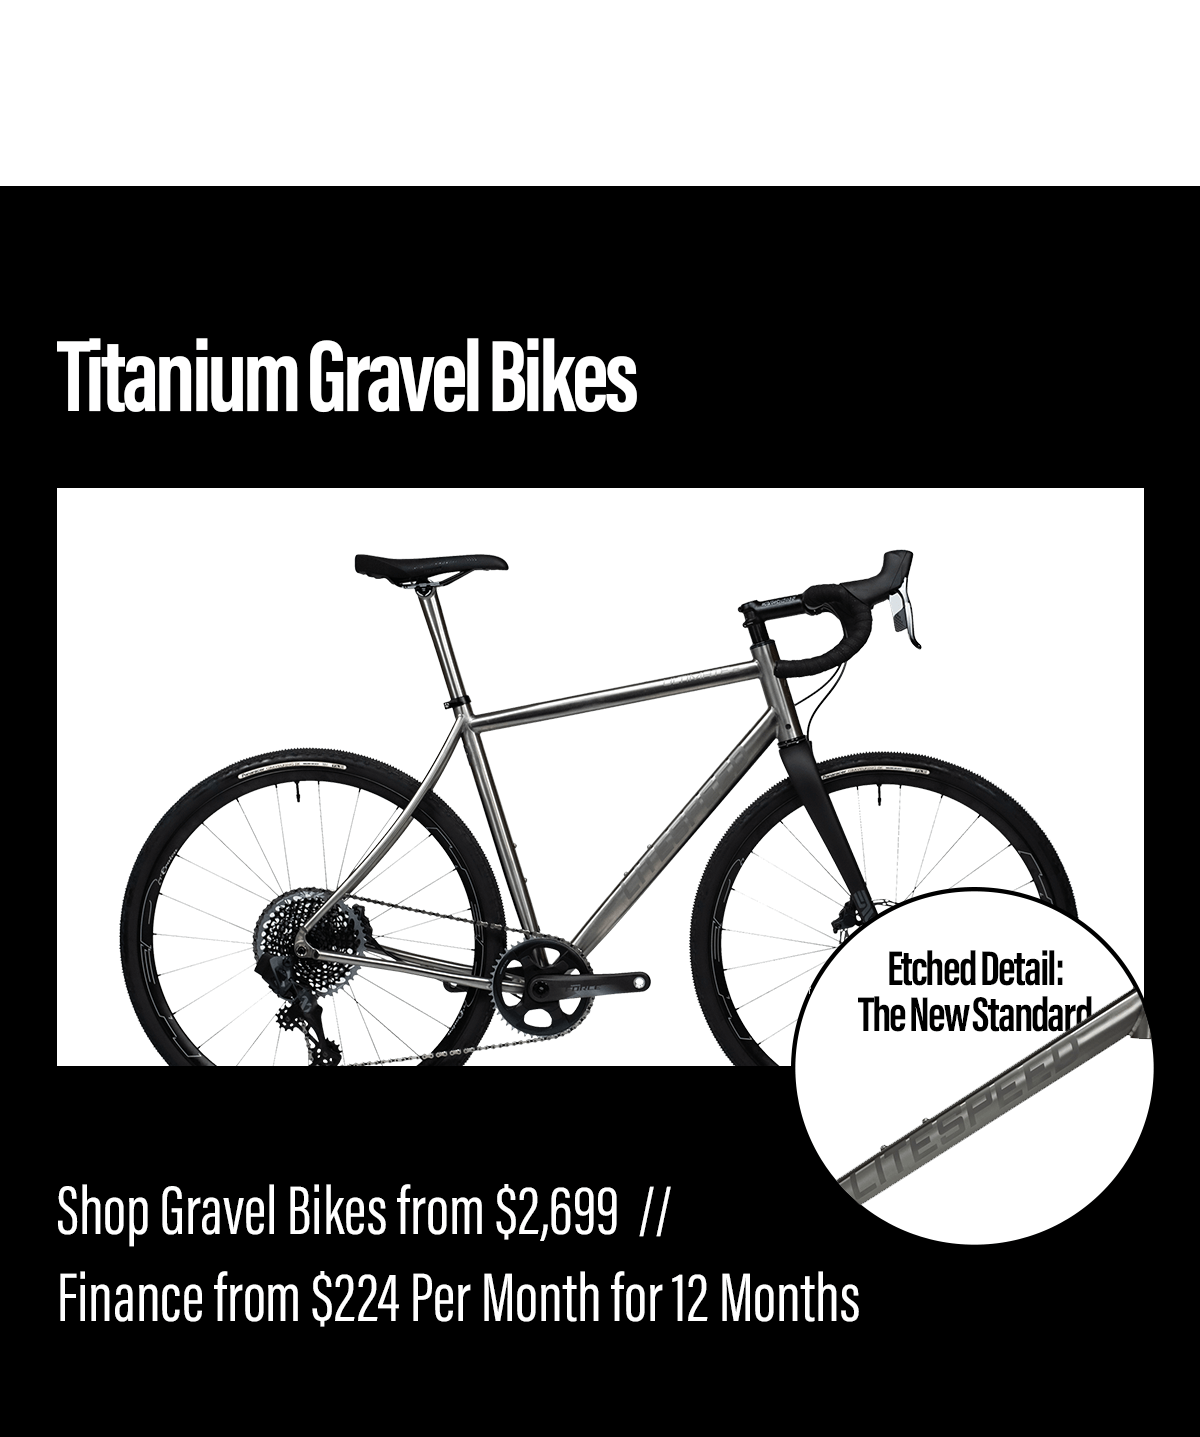 Experience the titanium difference! Shop titanium gravel bikes from $2,699.